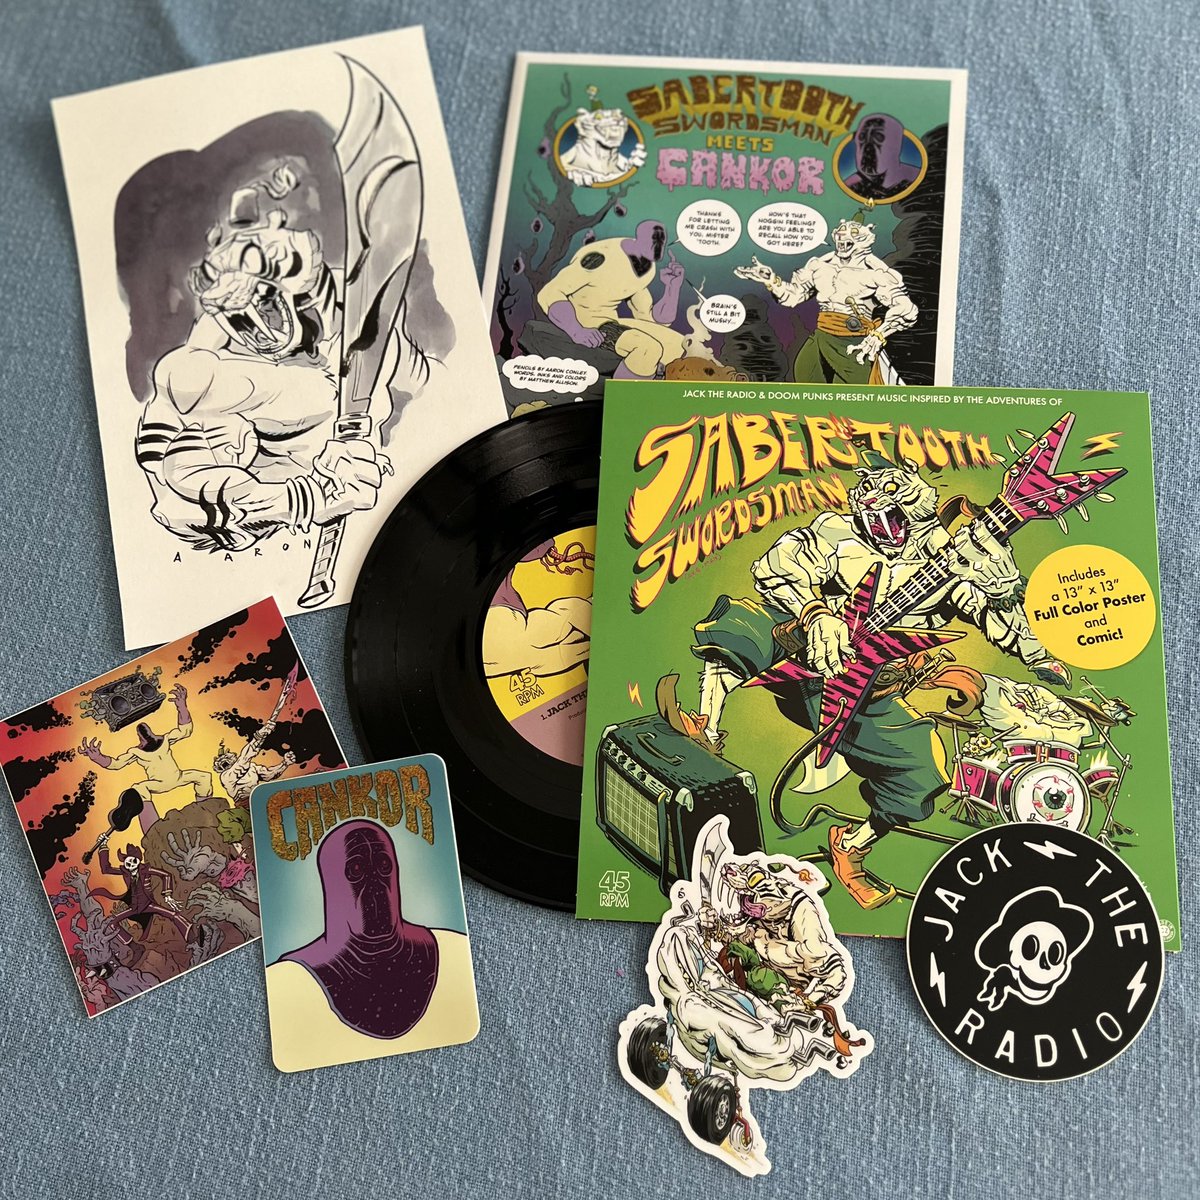 Cool swag just arrived from my pal @thegeorgehage and @JacktheRadio, featuring cool music and great art by @MatthewGAllison and an original Sabertooth Swordsman sketch by @AaronConley77! #jacktheradio #cankor #sabertoothswordsman #comics #music